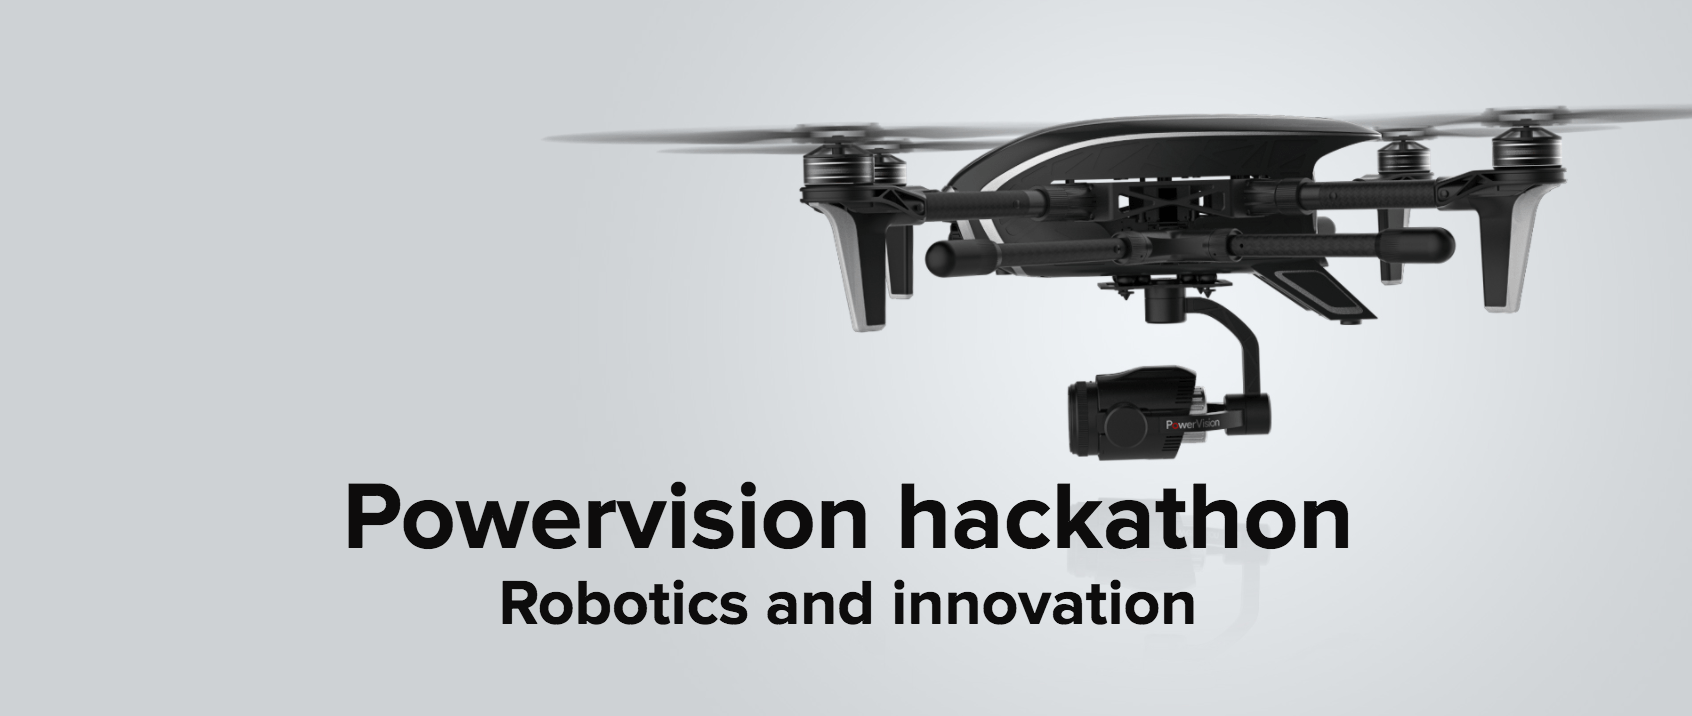 Powervision hackathon – Robotics and innovation @ CT Tampere